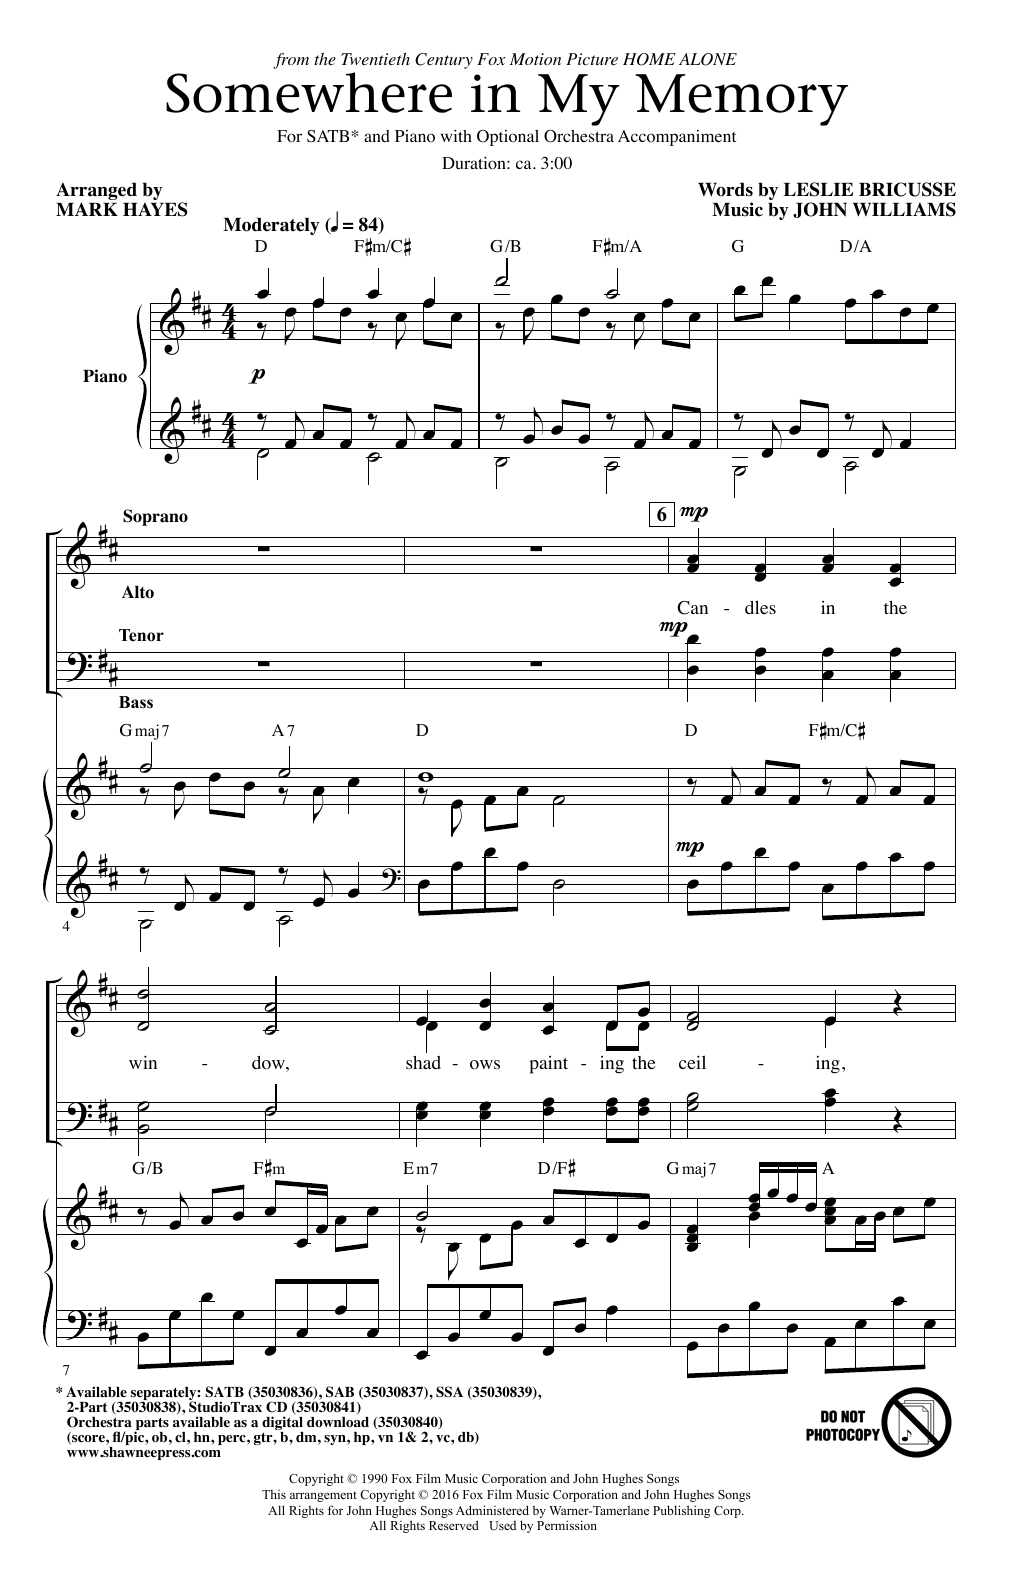 Download John Williams Somewhere In My Memory (Arr. Mark Hayes Sheet Music